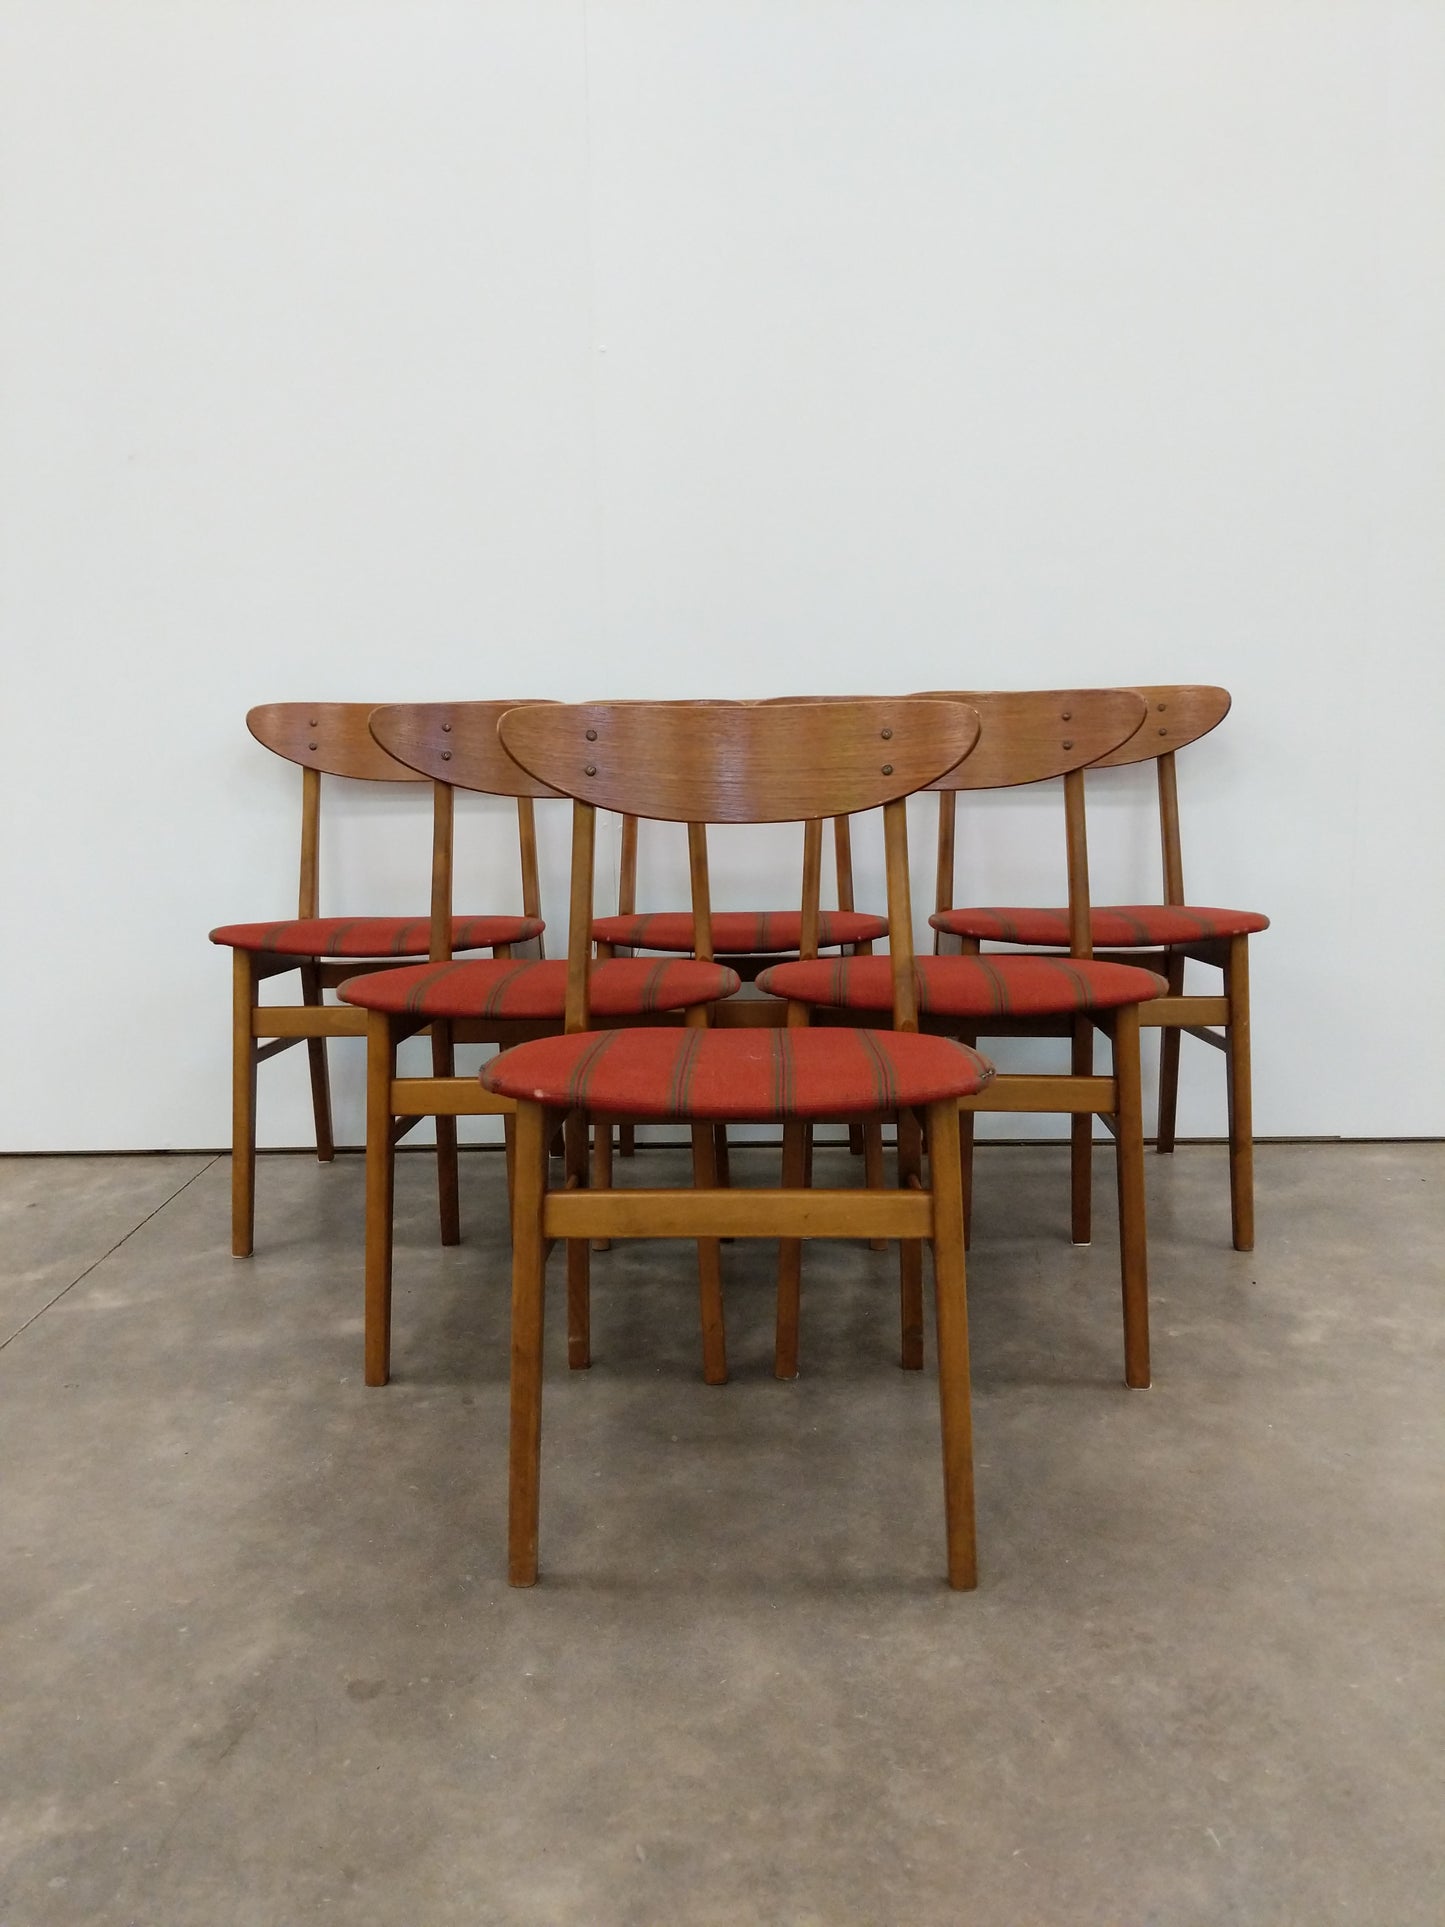 Set of 6 Vintage Danish Modern Dining Chairs by Farstrup